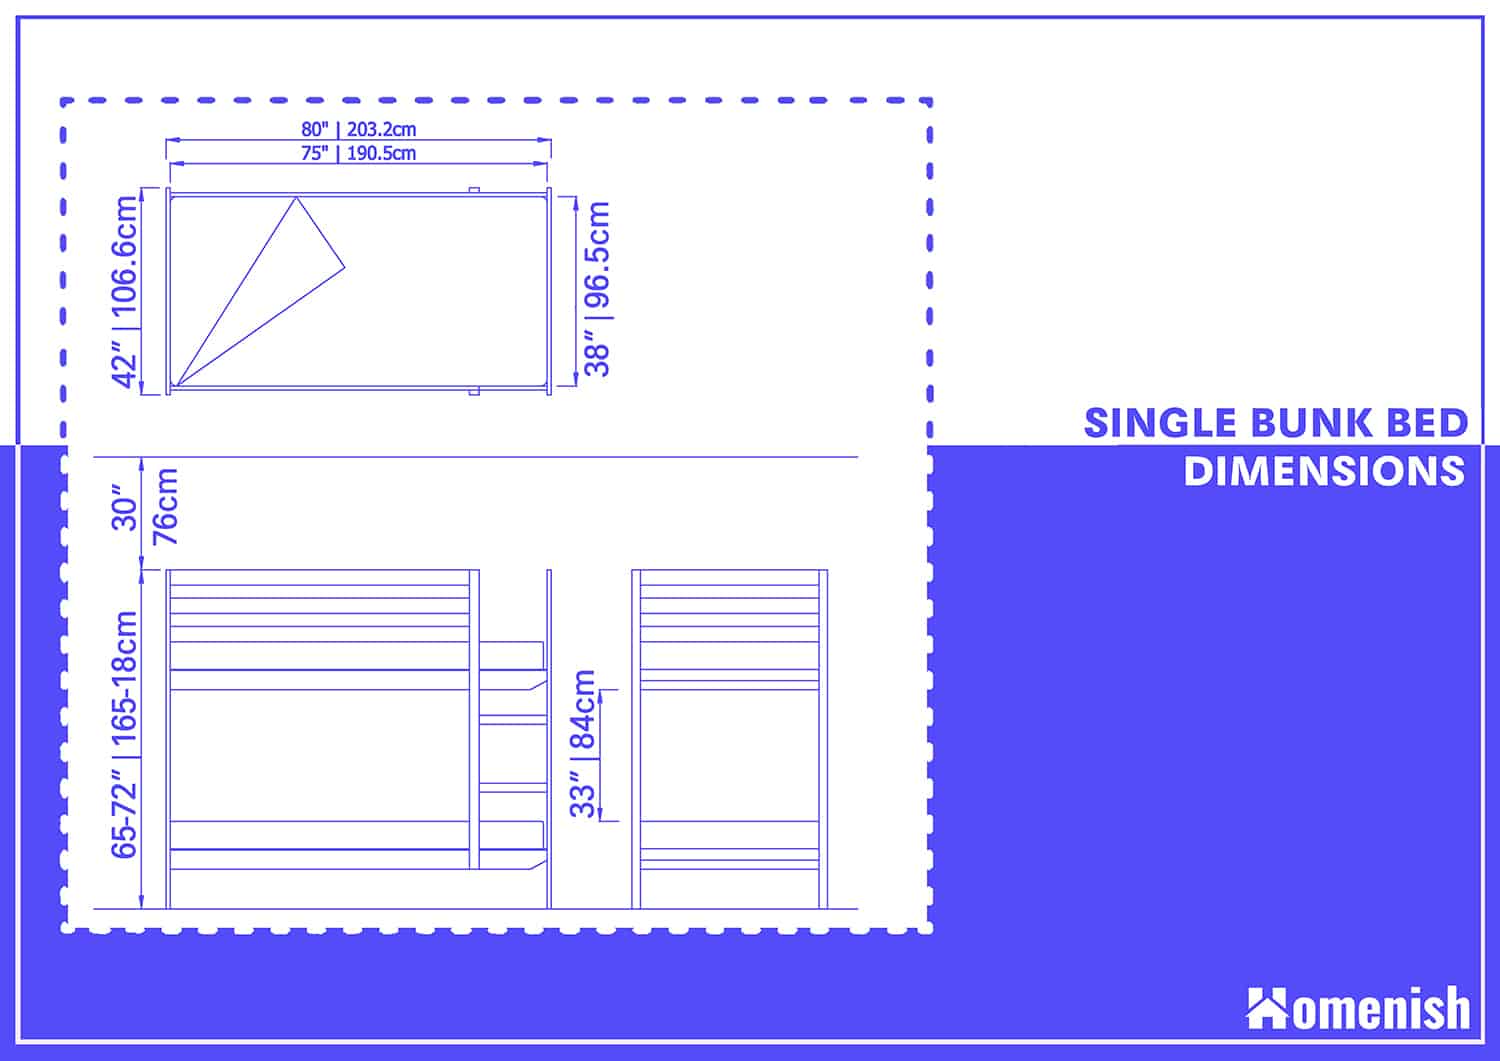 Standard Bunk Bed Dimensions With 3, Standard Bunk Bed Dimensions Height